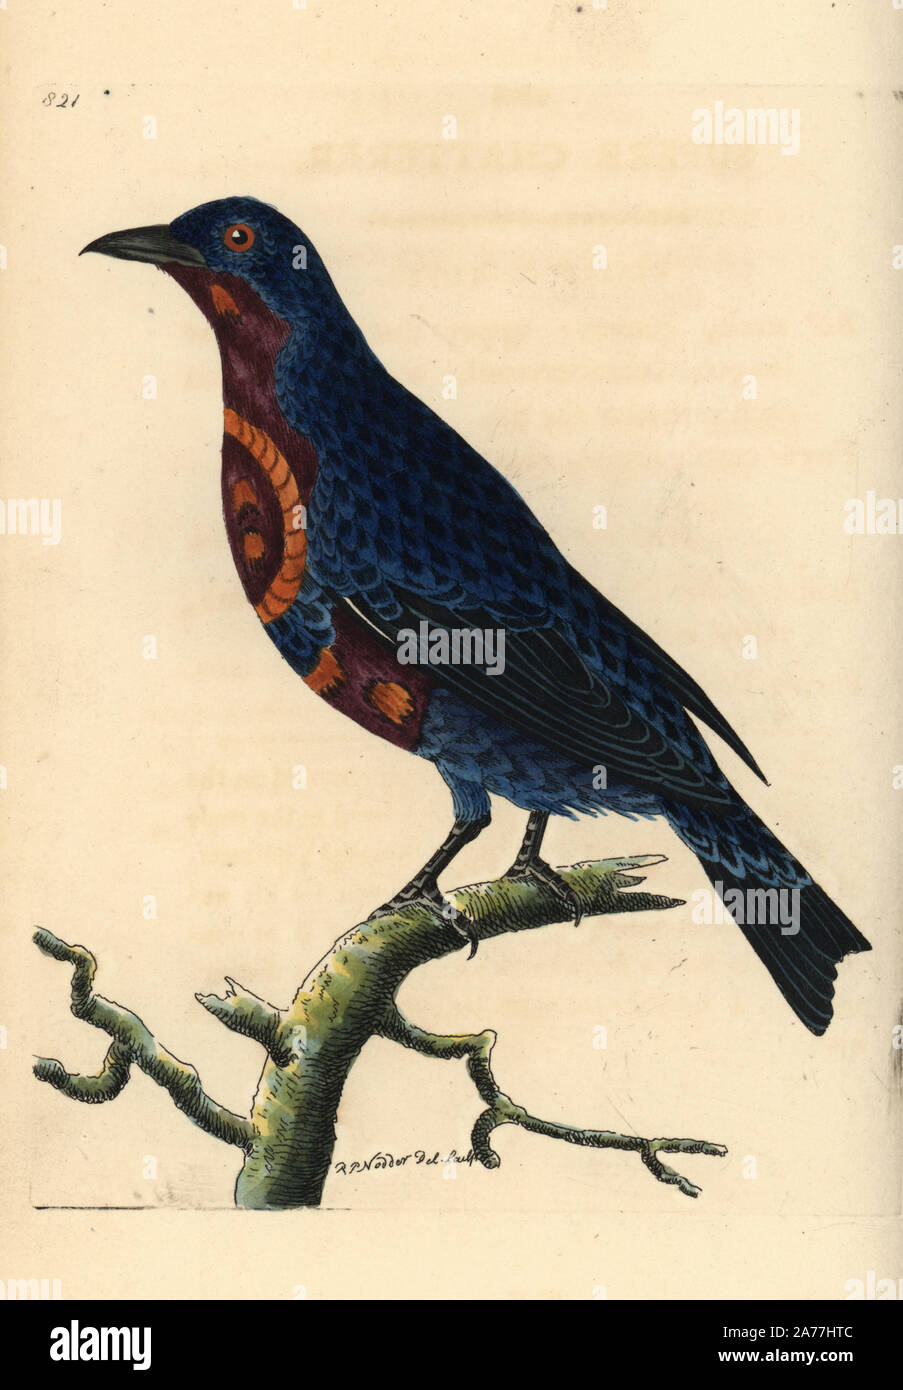 Banded cotinga, Cotinga maculata, endangered (Superb chatterer, Ampelis superba).Illustration drawn and engraved by Richard Polydore Nodder. Handcoloured copperplate engraving from George Shaw and Frederick Nodder's The Naturalist's Miscellany, London, 1806. Stock Photo